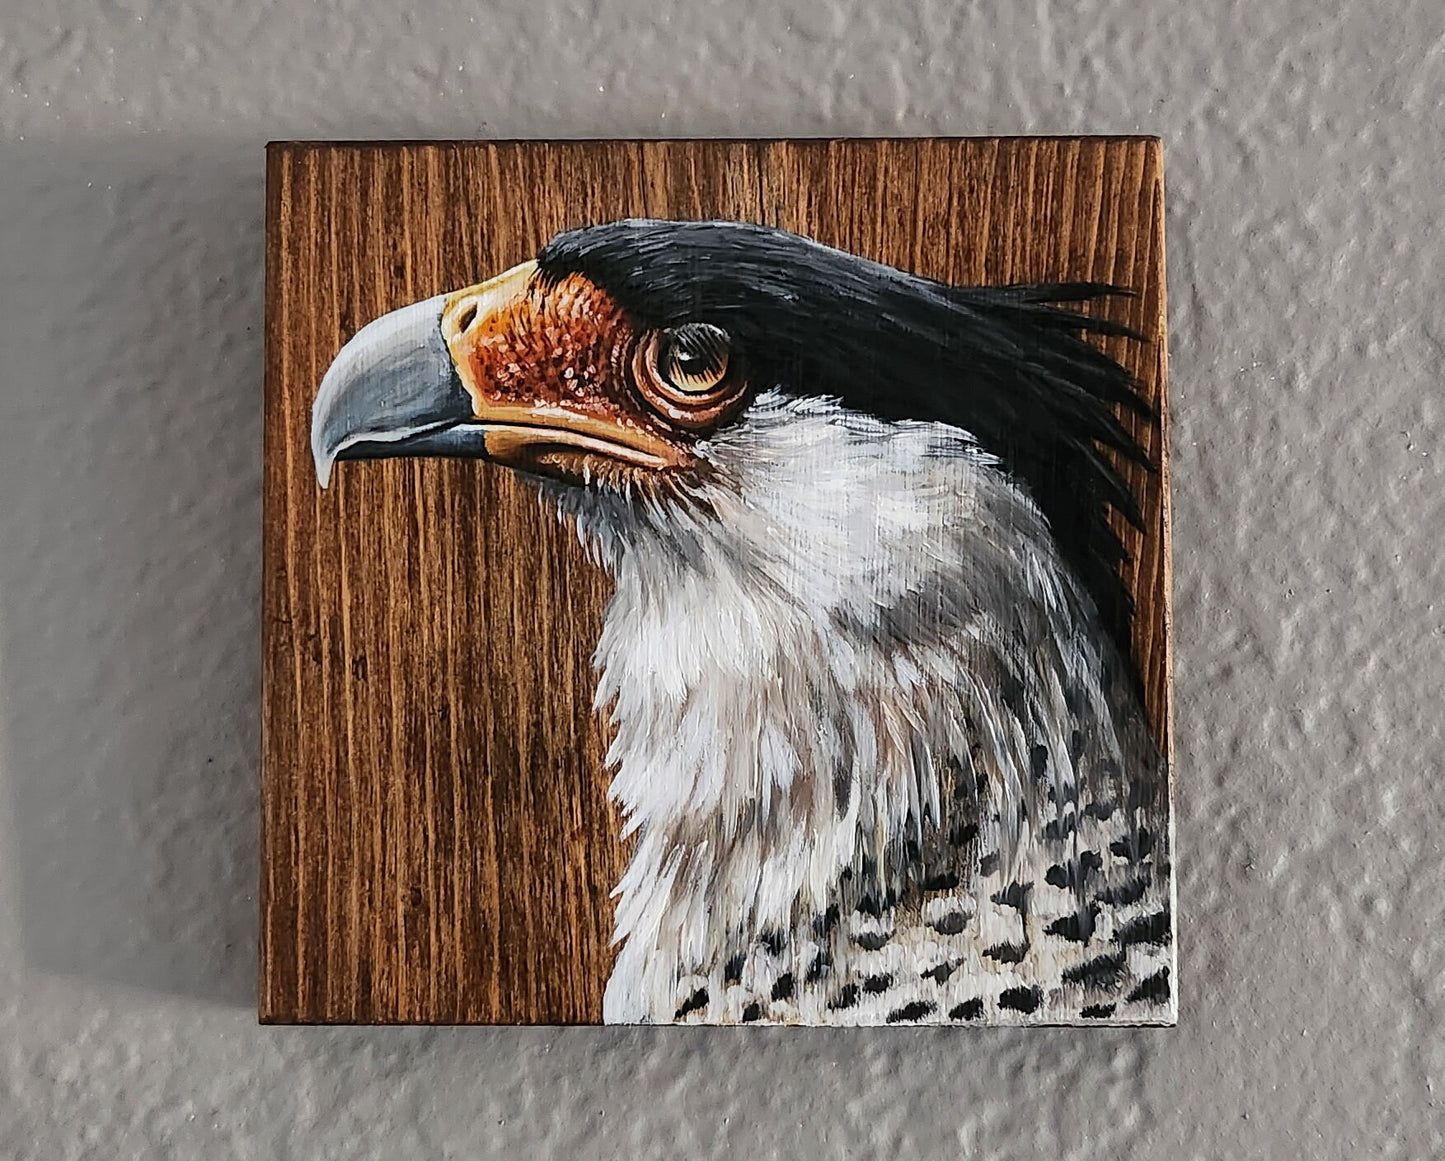 Crested Caracara Oil Painting on Reclaimed Wood, Sonoran Desert wall art, Southwestern Decor, Mexican Eagle